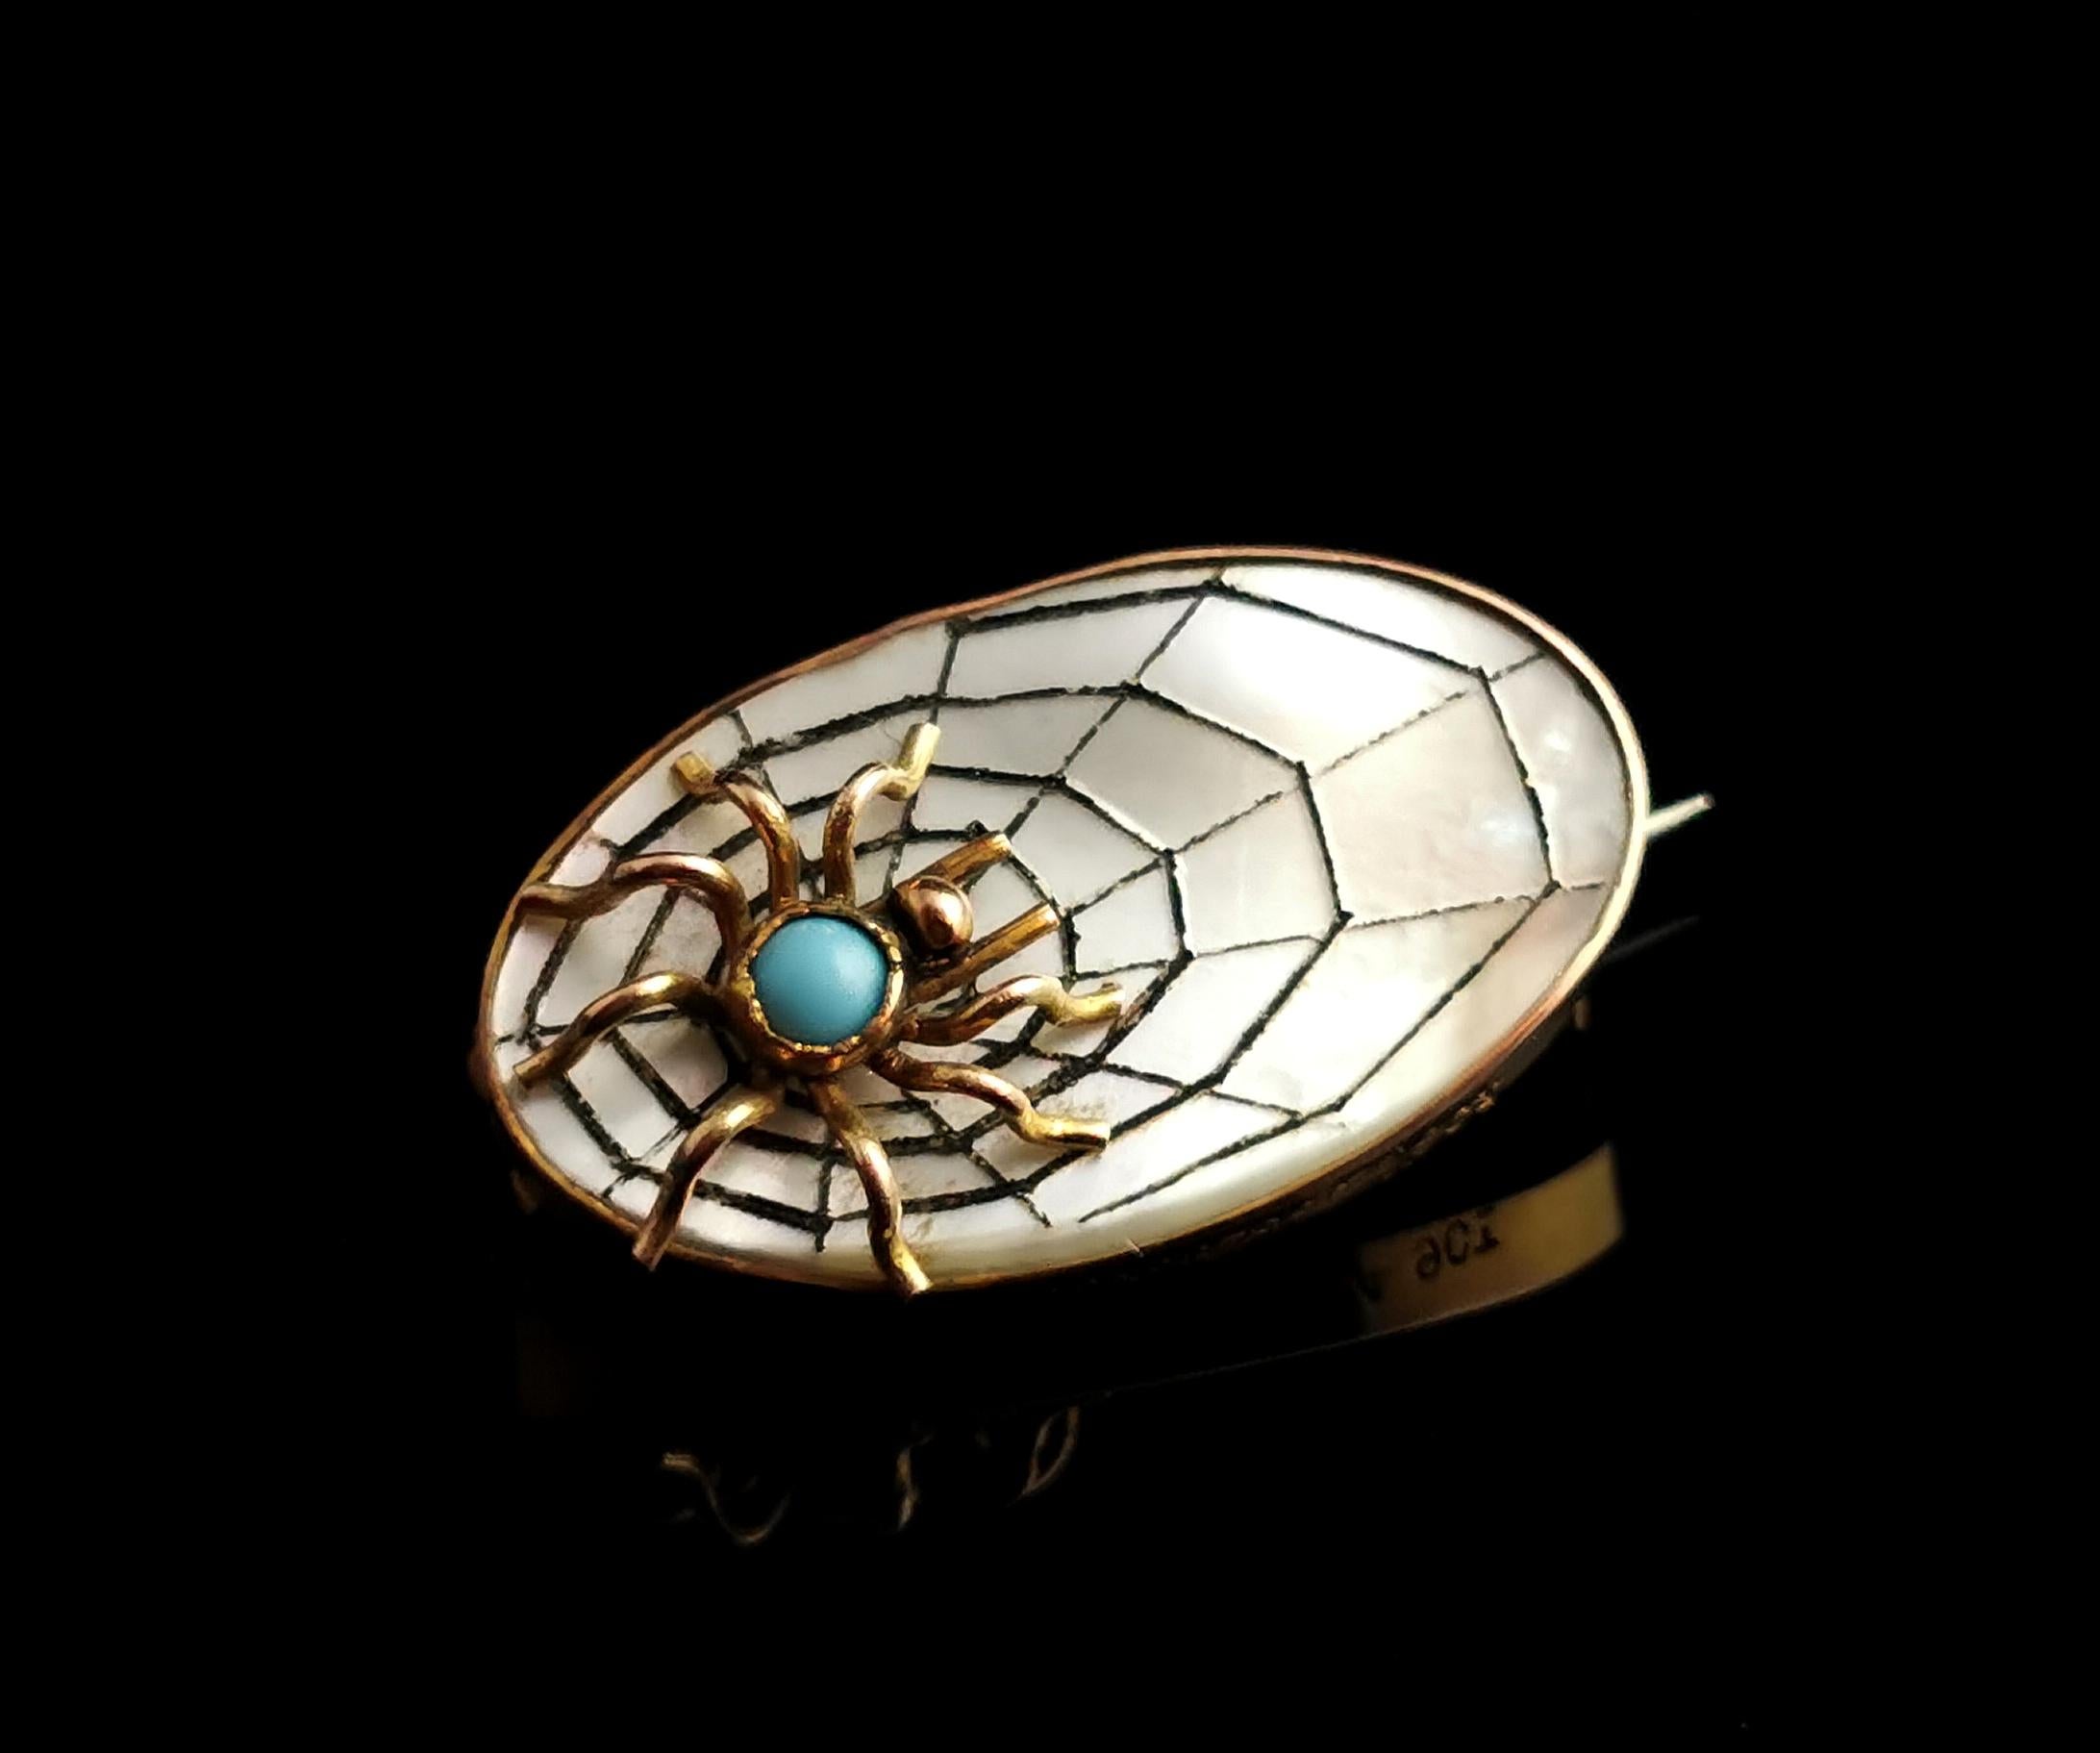 Antique Spider and Web Brooch, 9k Gold, Mother of Pearl 3